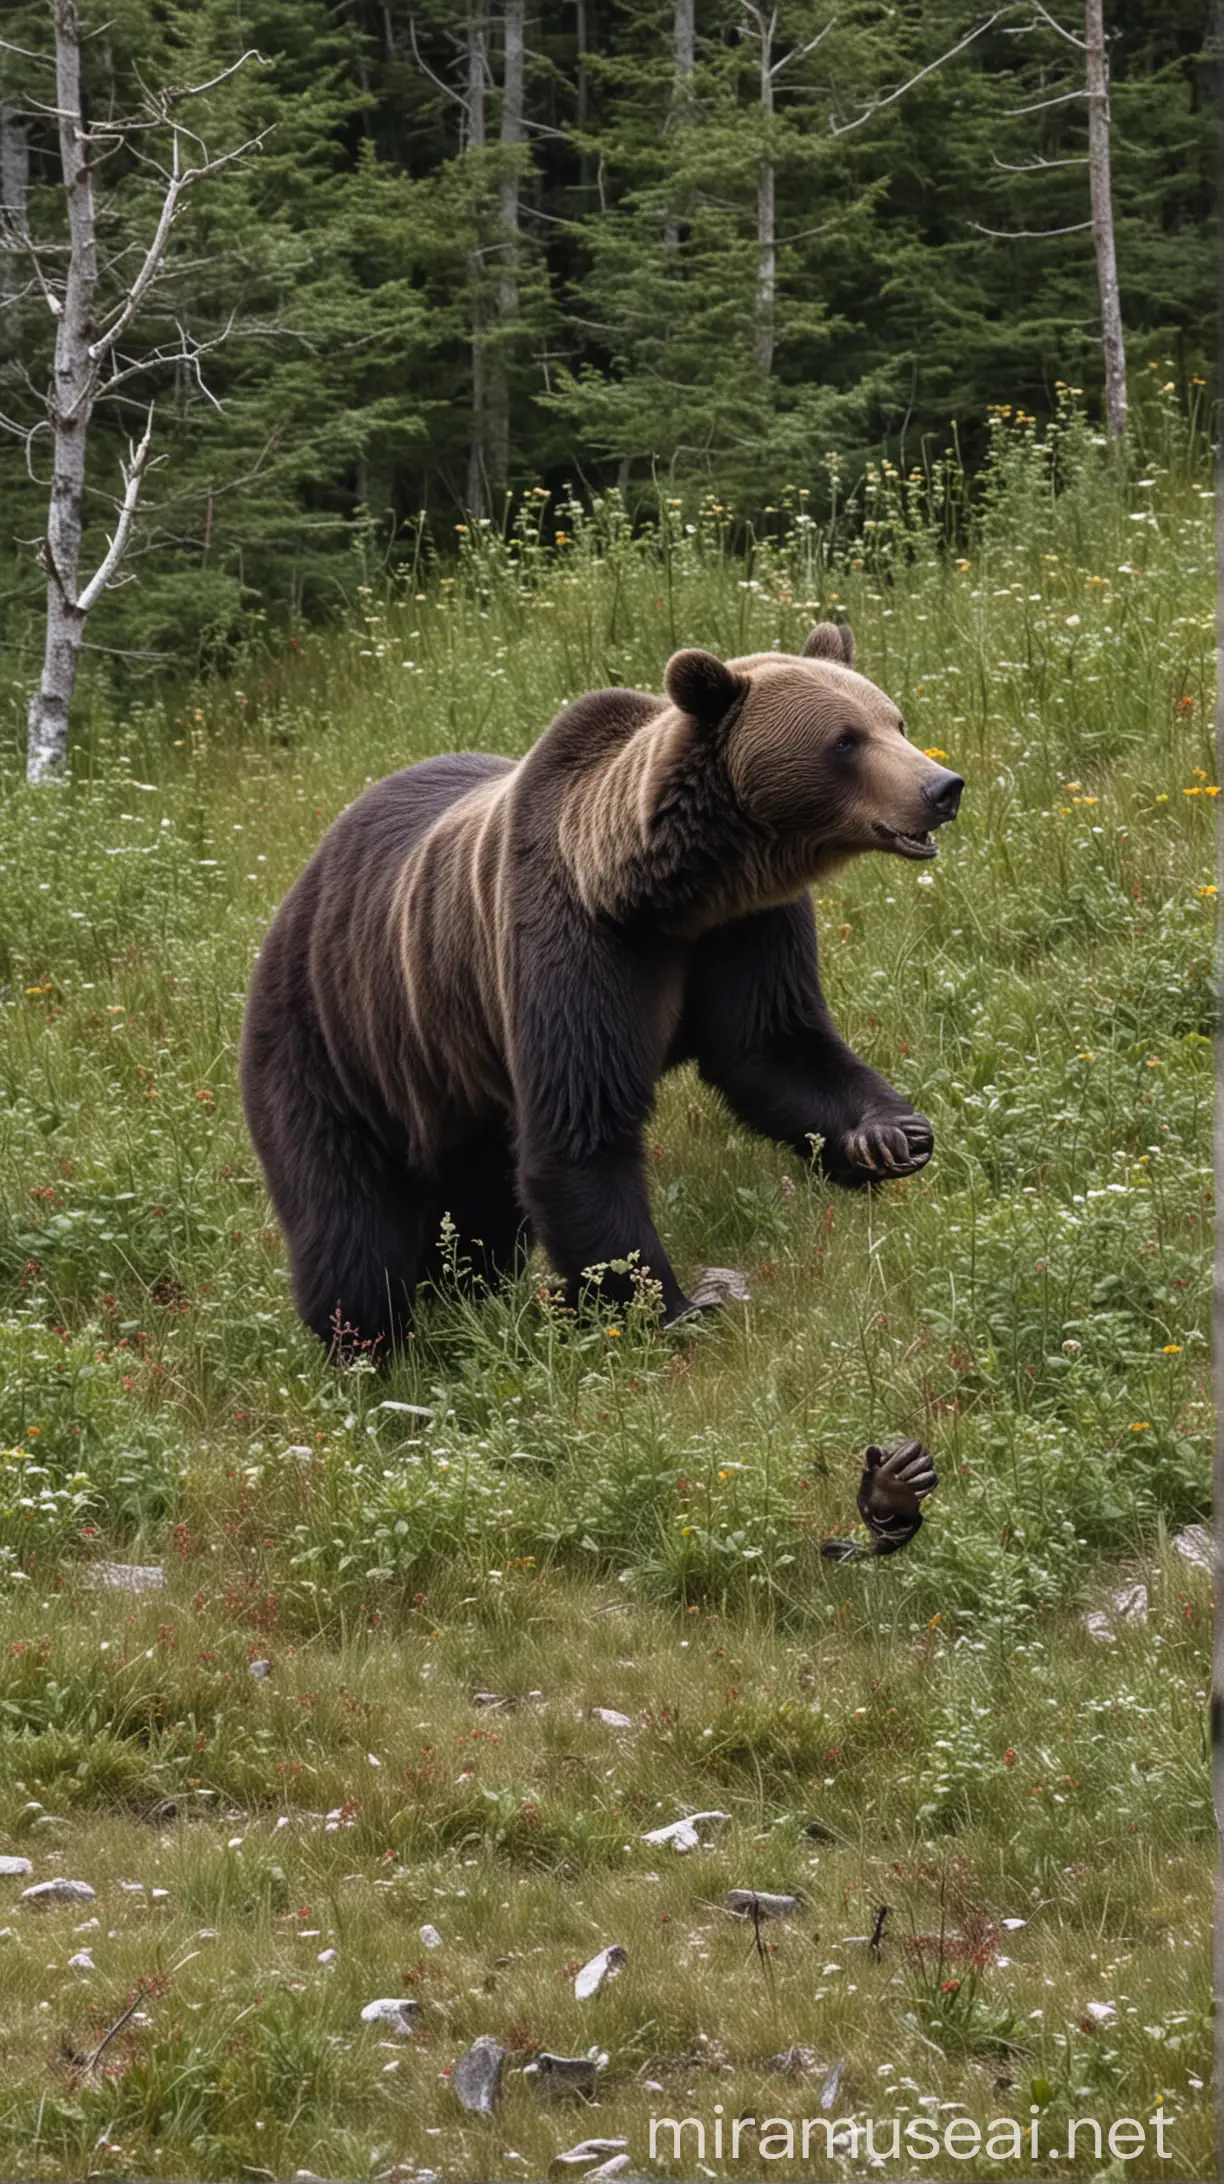 Encounter with a Wild Bear Fleeing and Praying Travelers